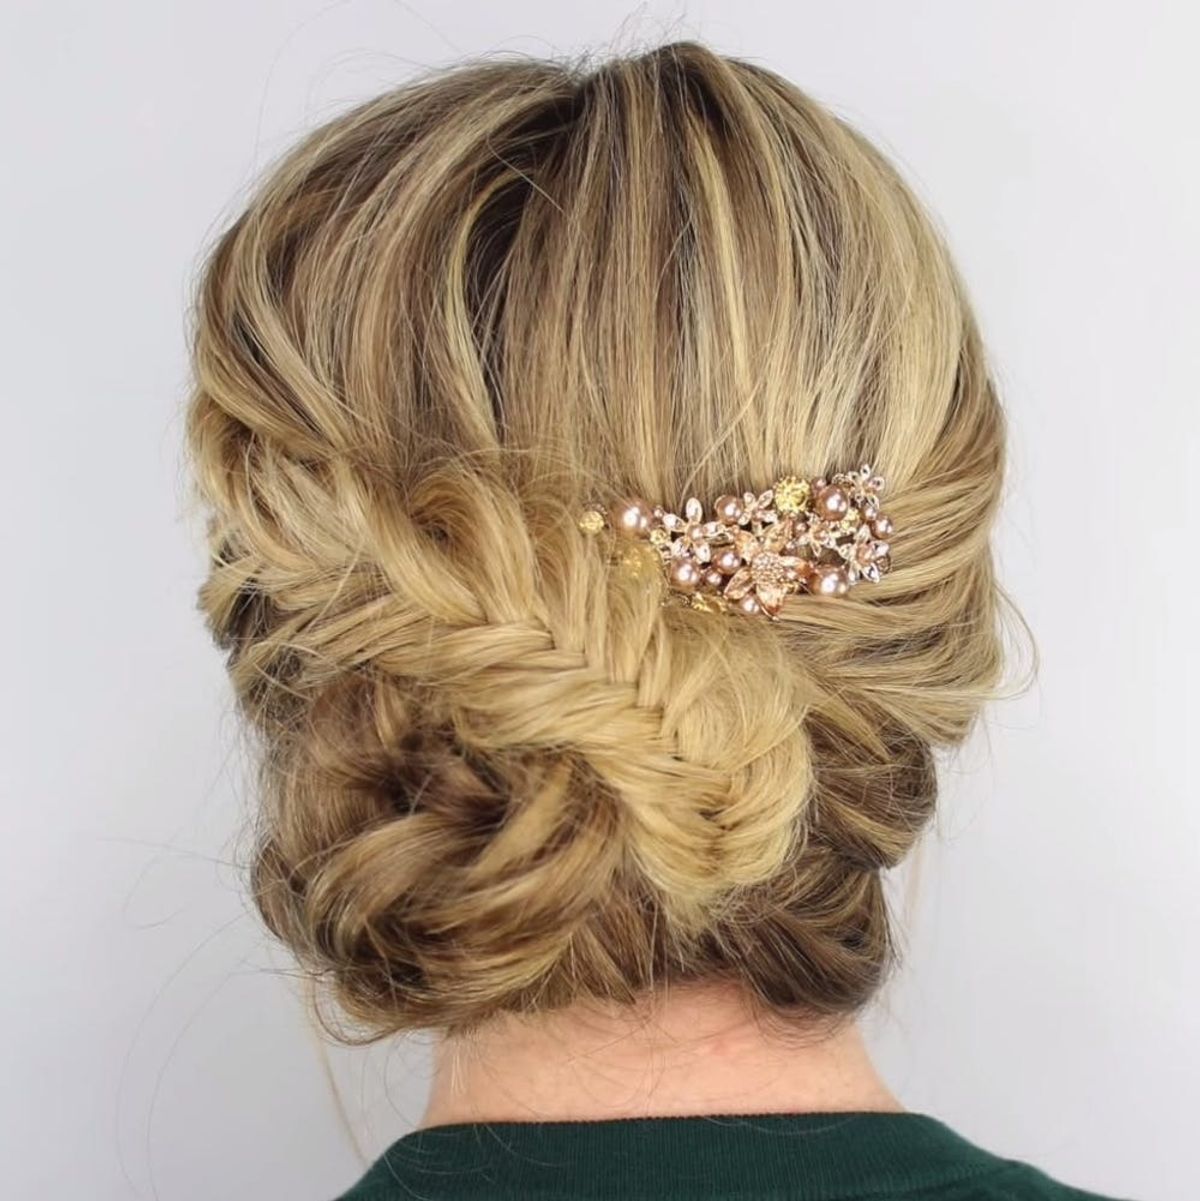 17 Formal Hairstyles That Are Surprisingly Easy to DIY